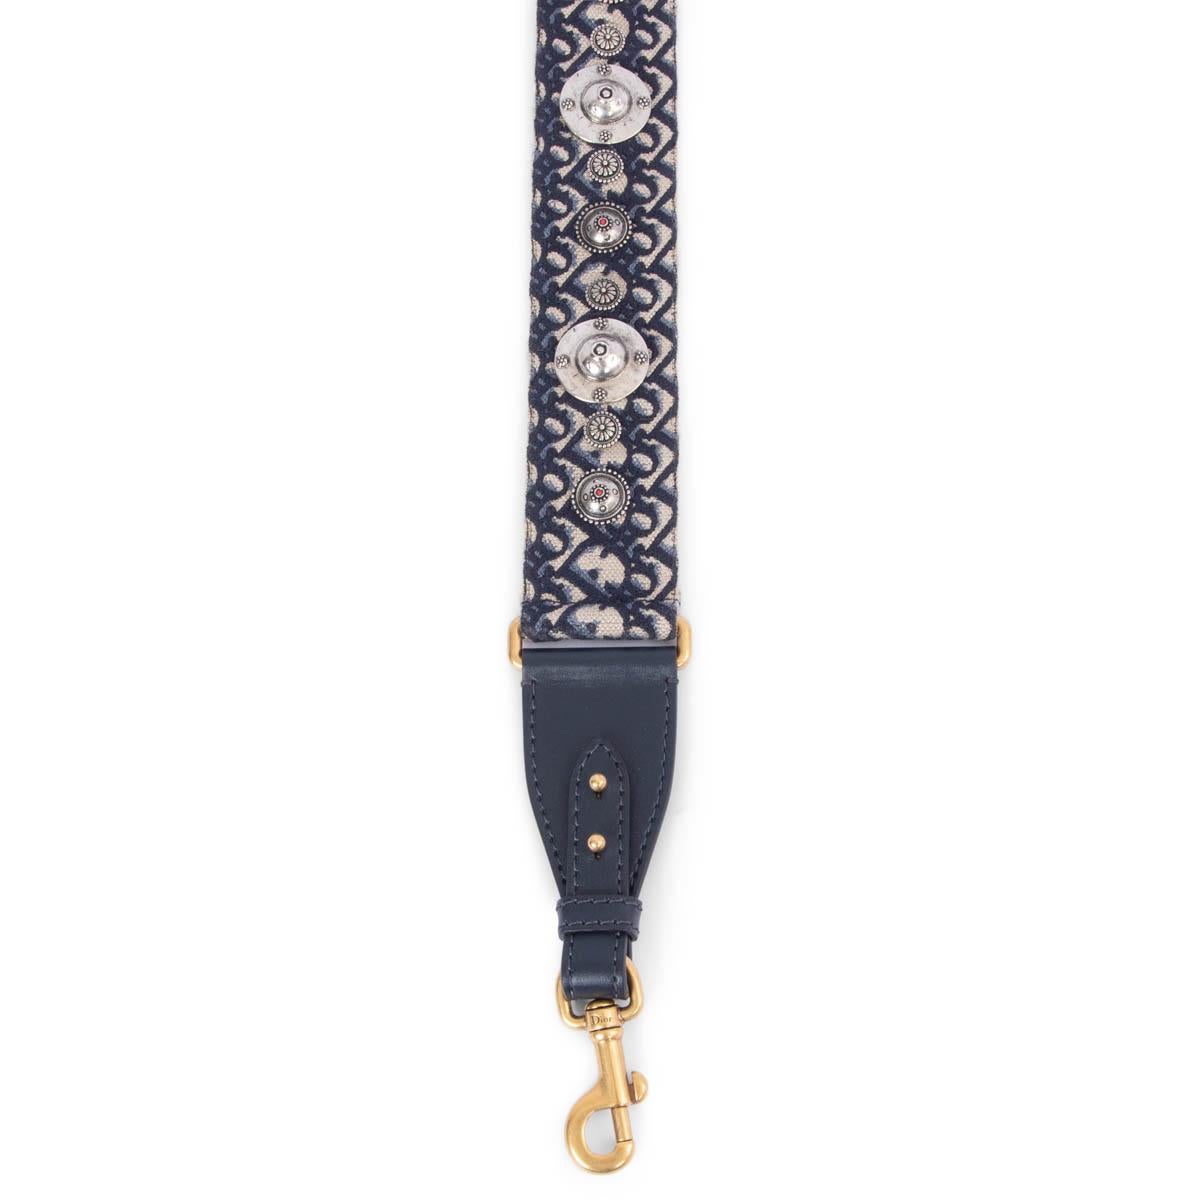 100% authentic Christian Dior silver-tone studded metal emblems Dior Oblique belt strap in navy blue and light grey canvas featuring gold-tone clasps with navy leather trimming. Has been carried and is in excellent condition.